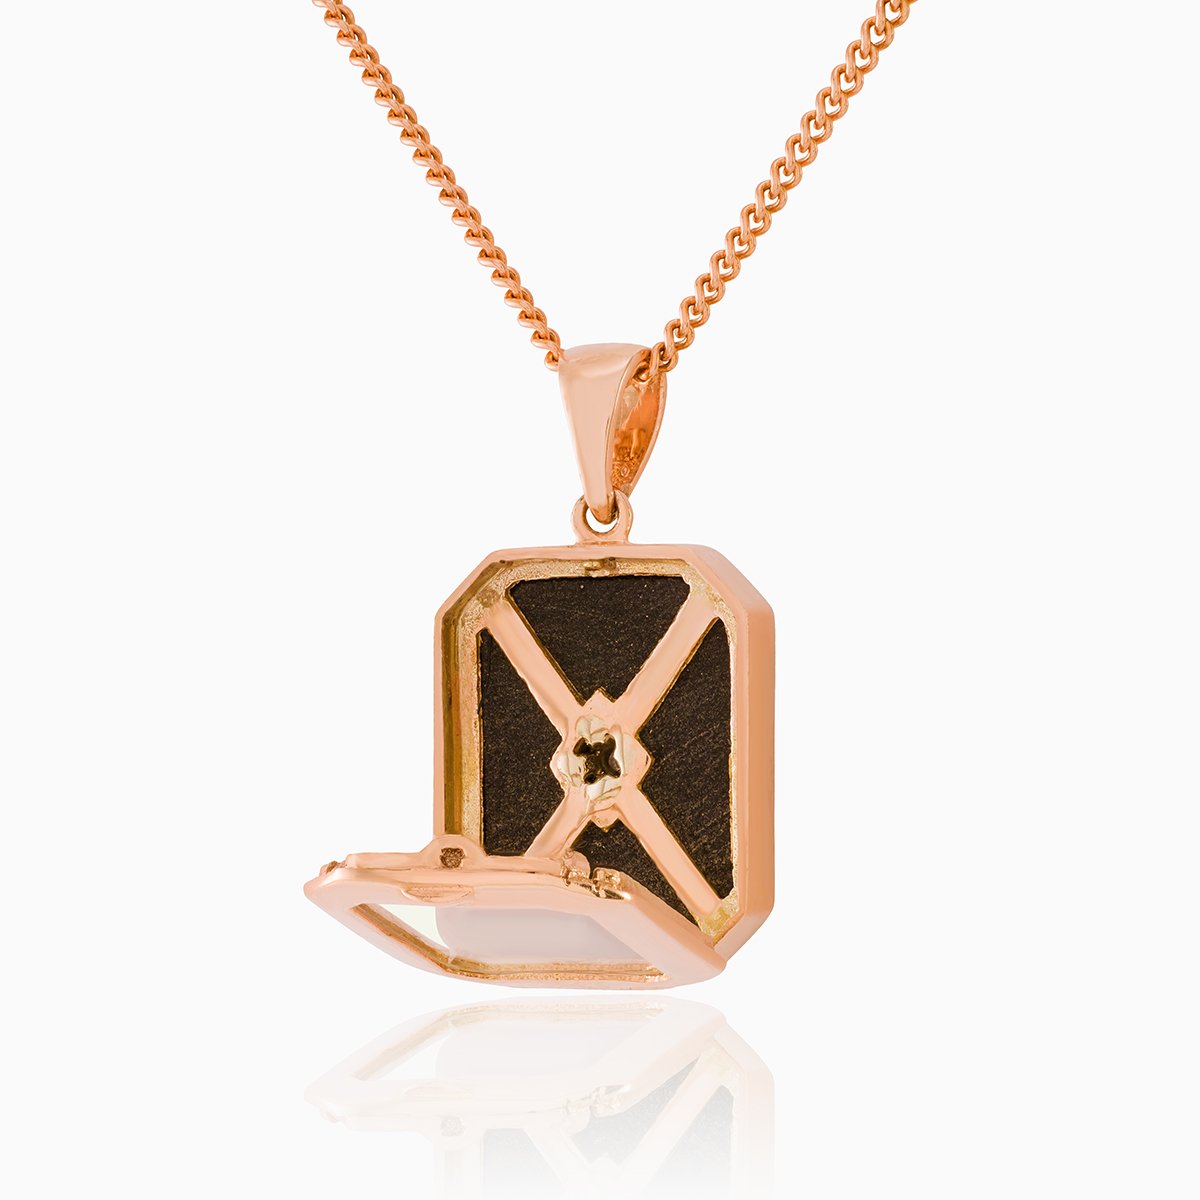 Open view of a glass backed 9 ct rose gold tabular shaped locket on a 9 ct rose gold curb chain